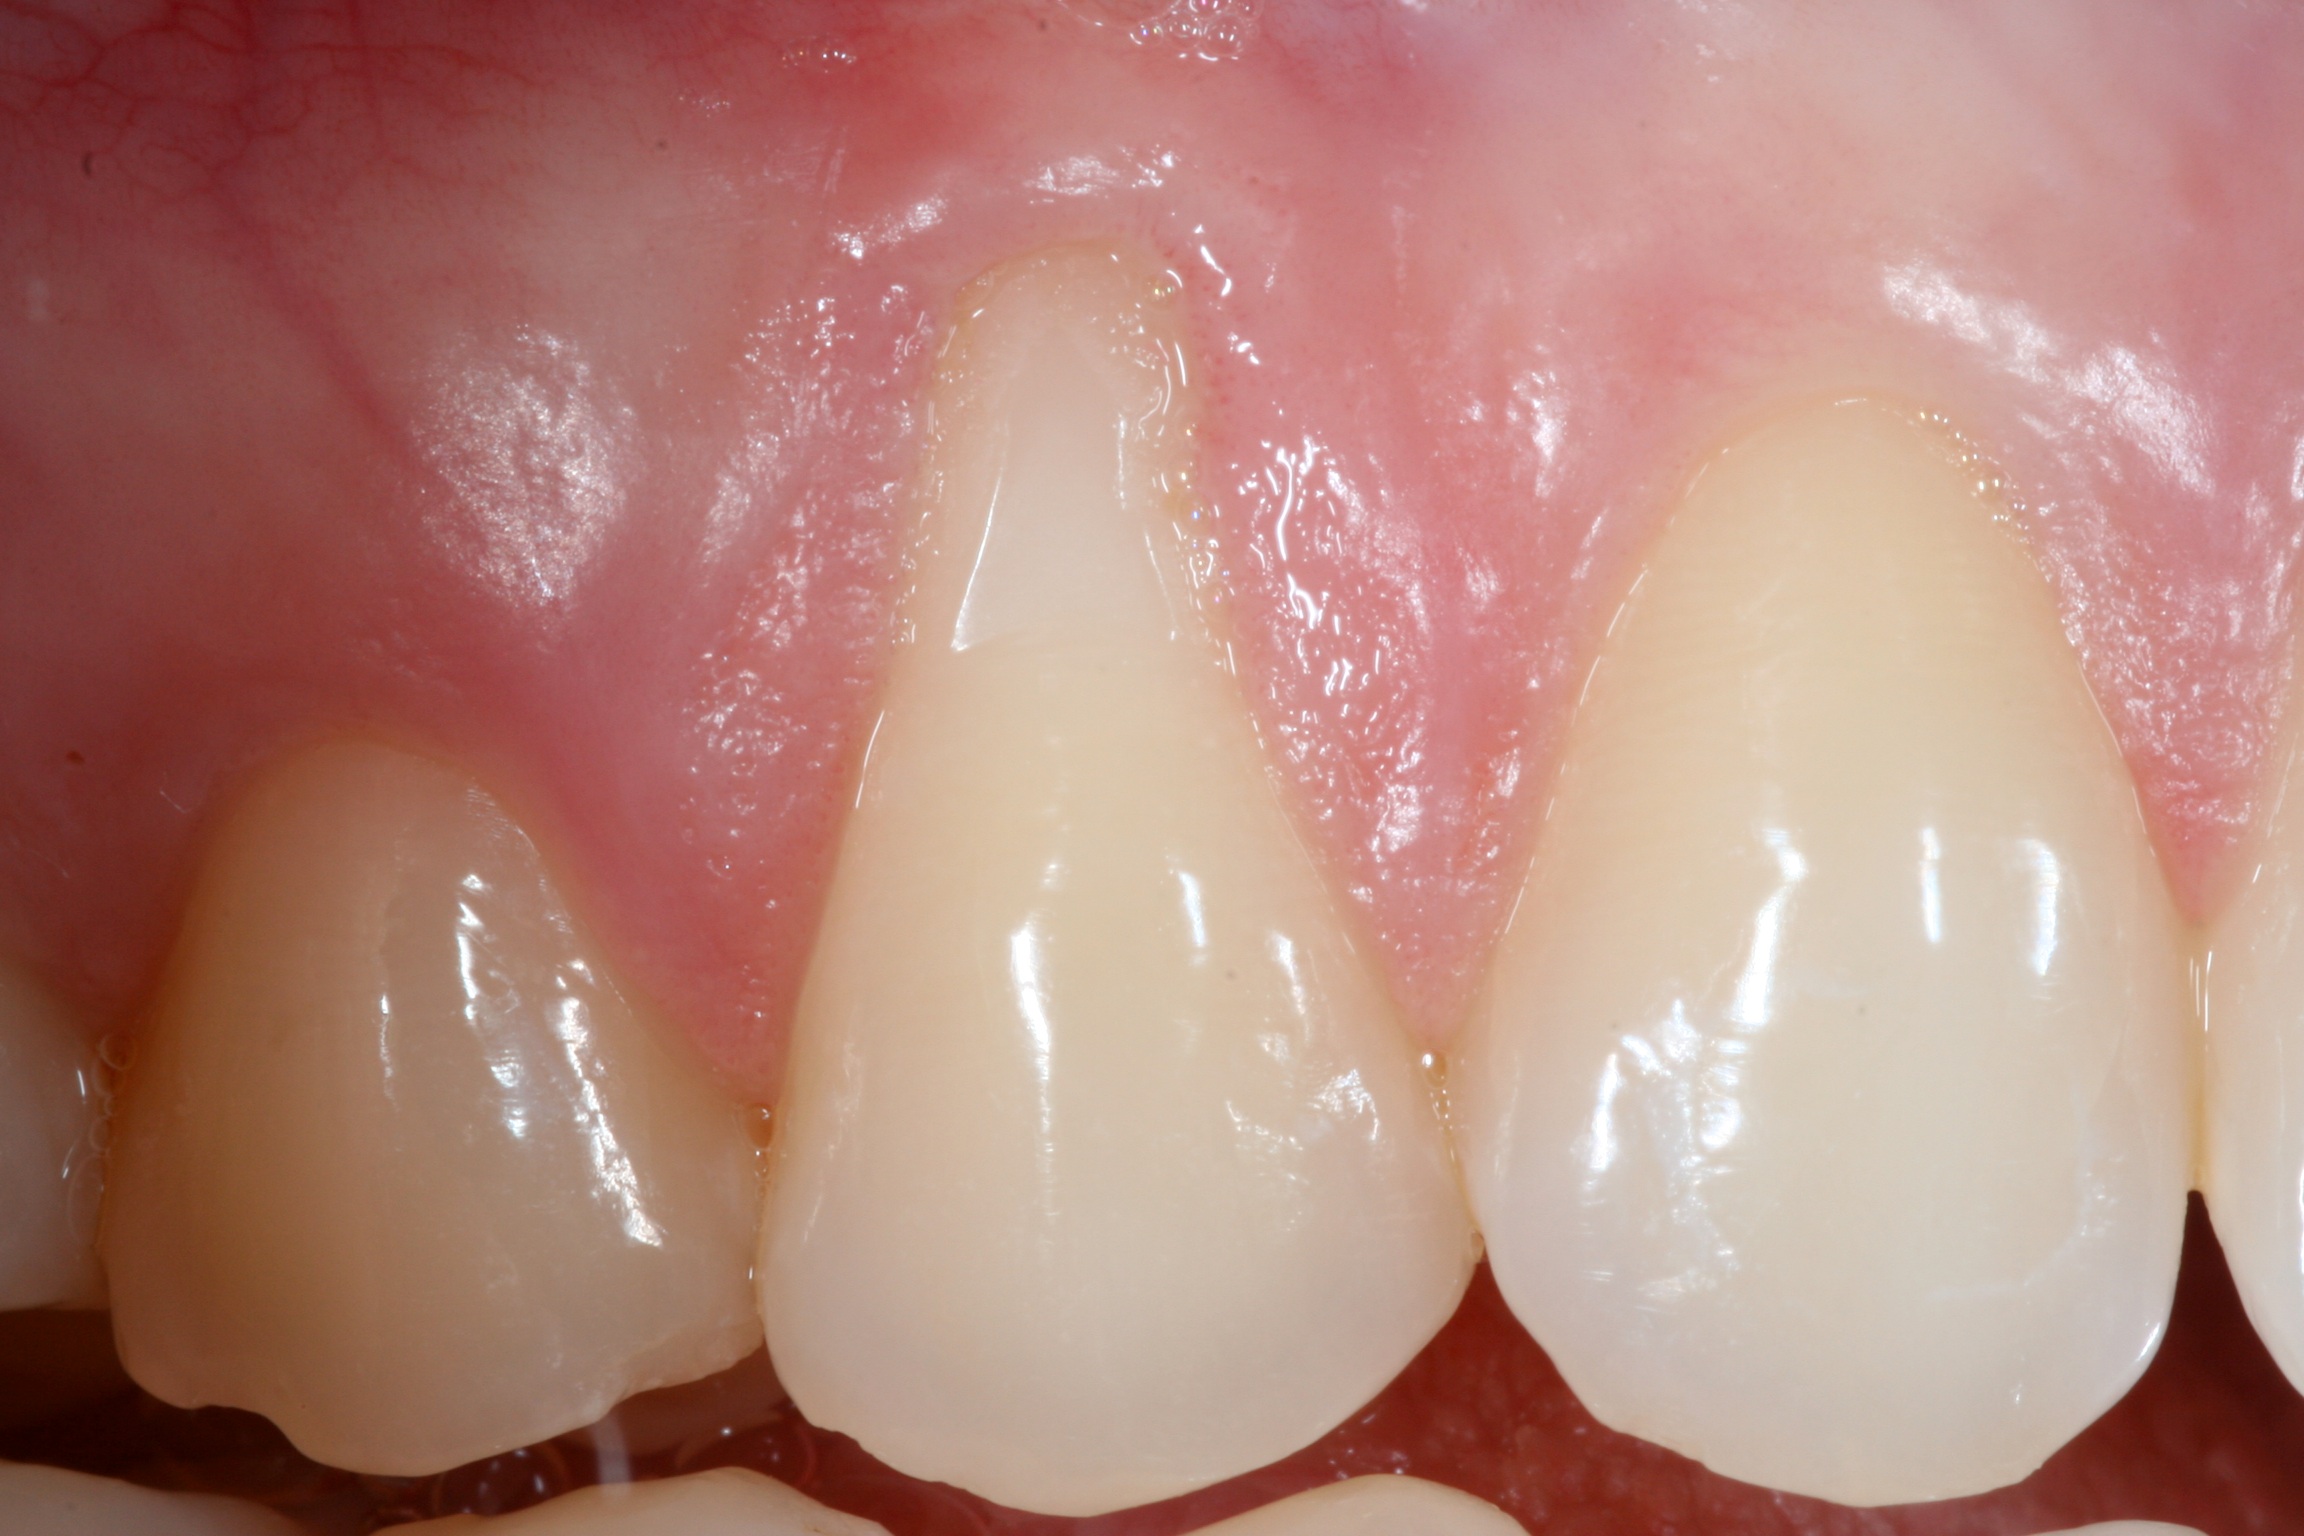 Before and after periodontal treatment